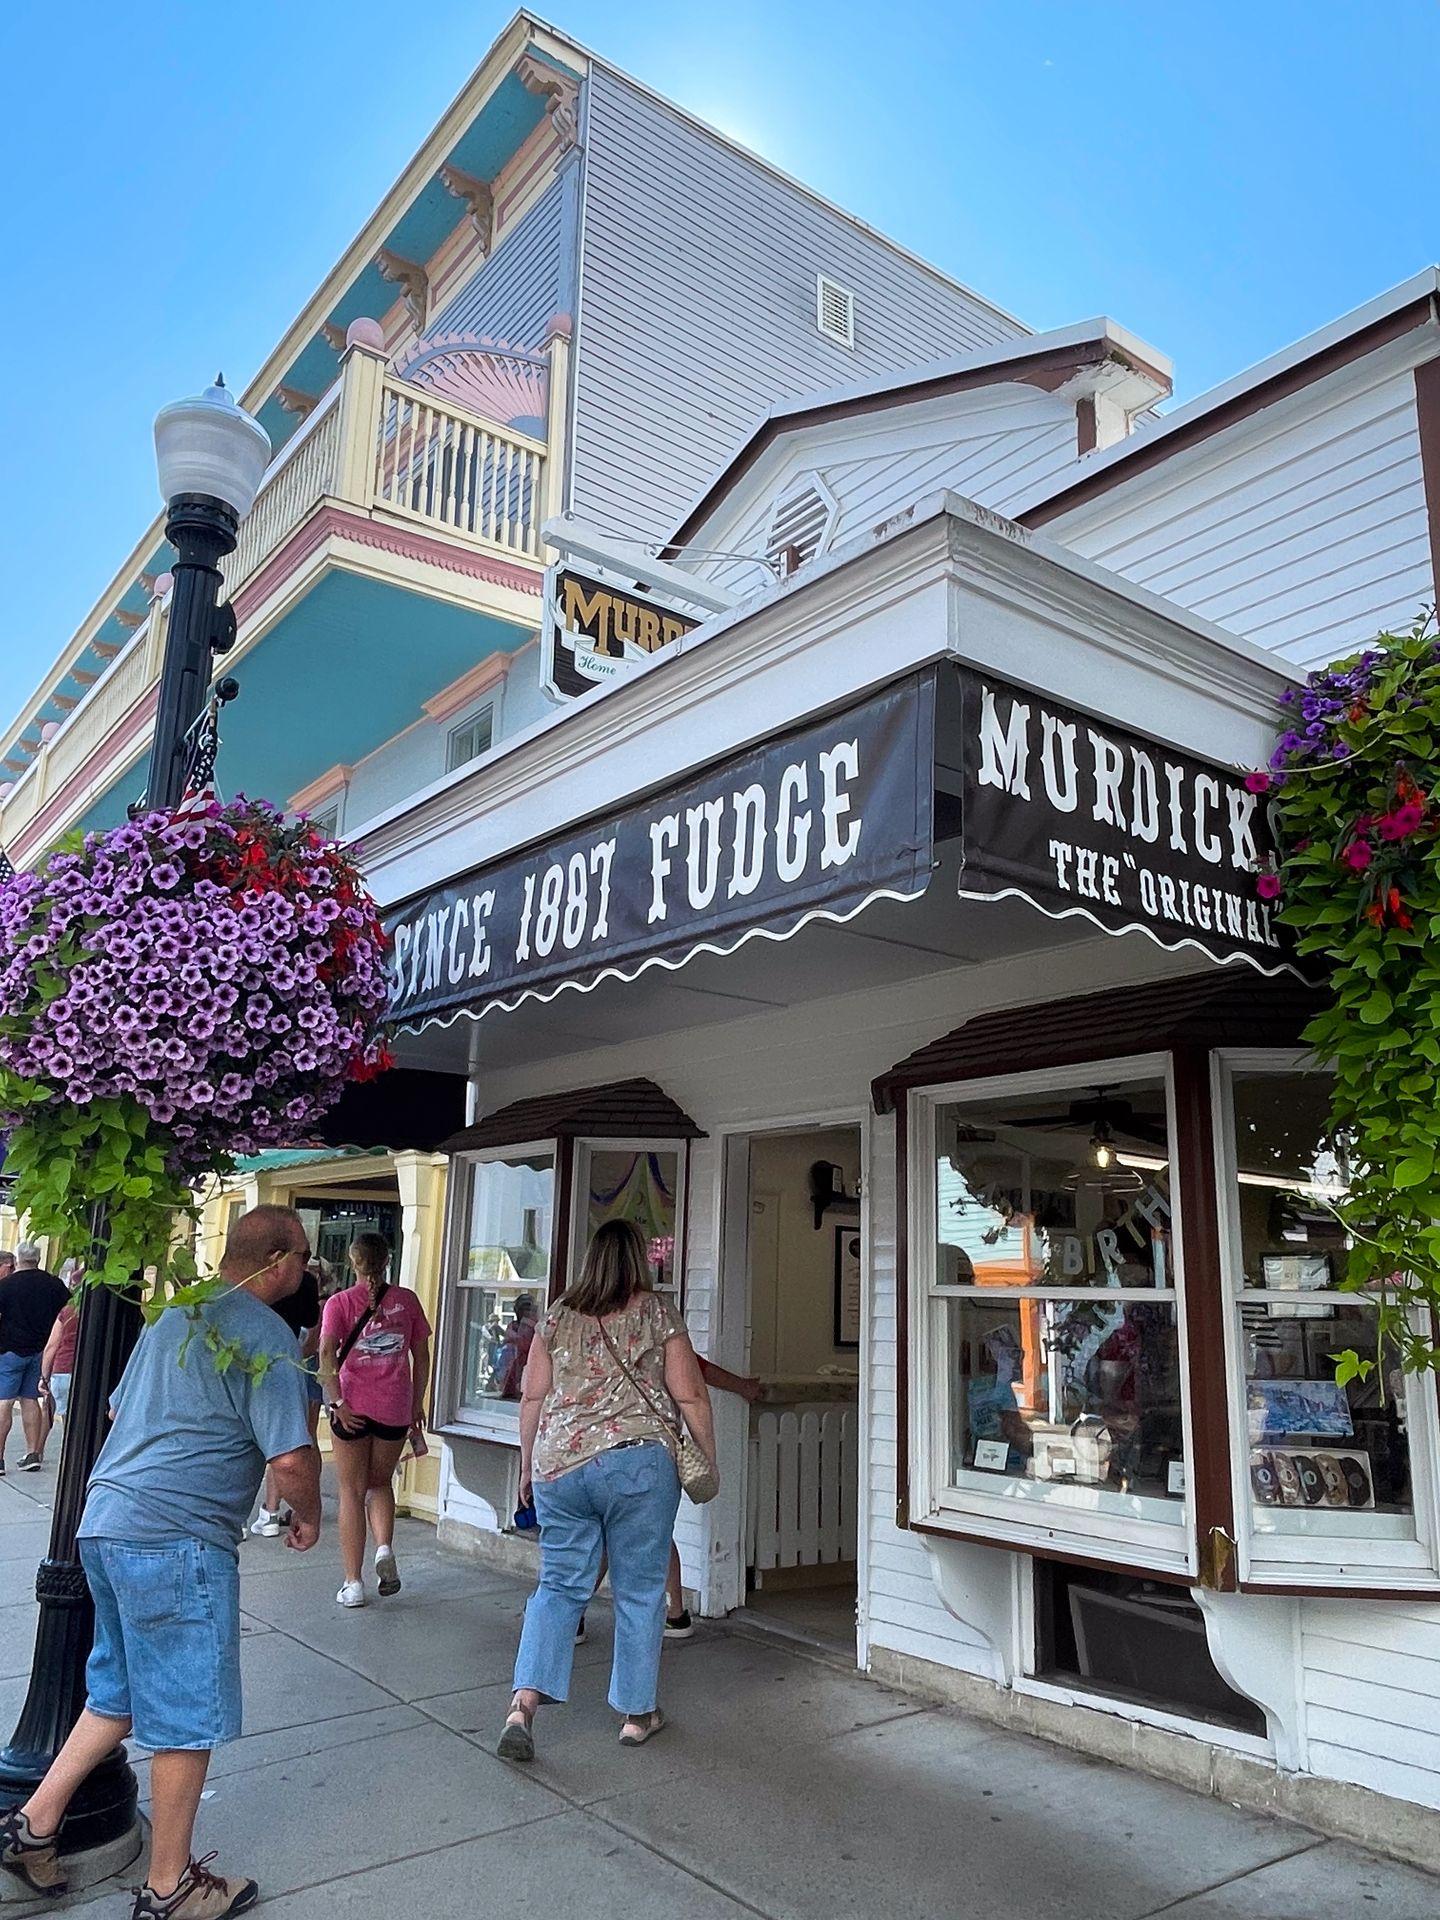 The outside of Murick's Fudge in Downtown Mackinac.